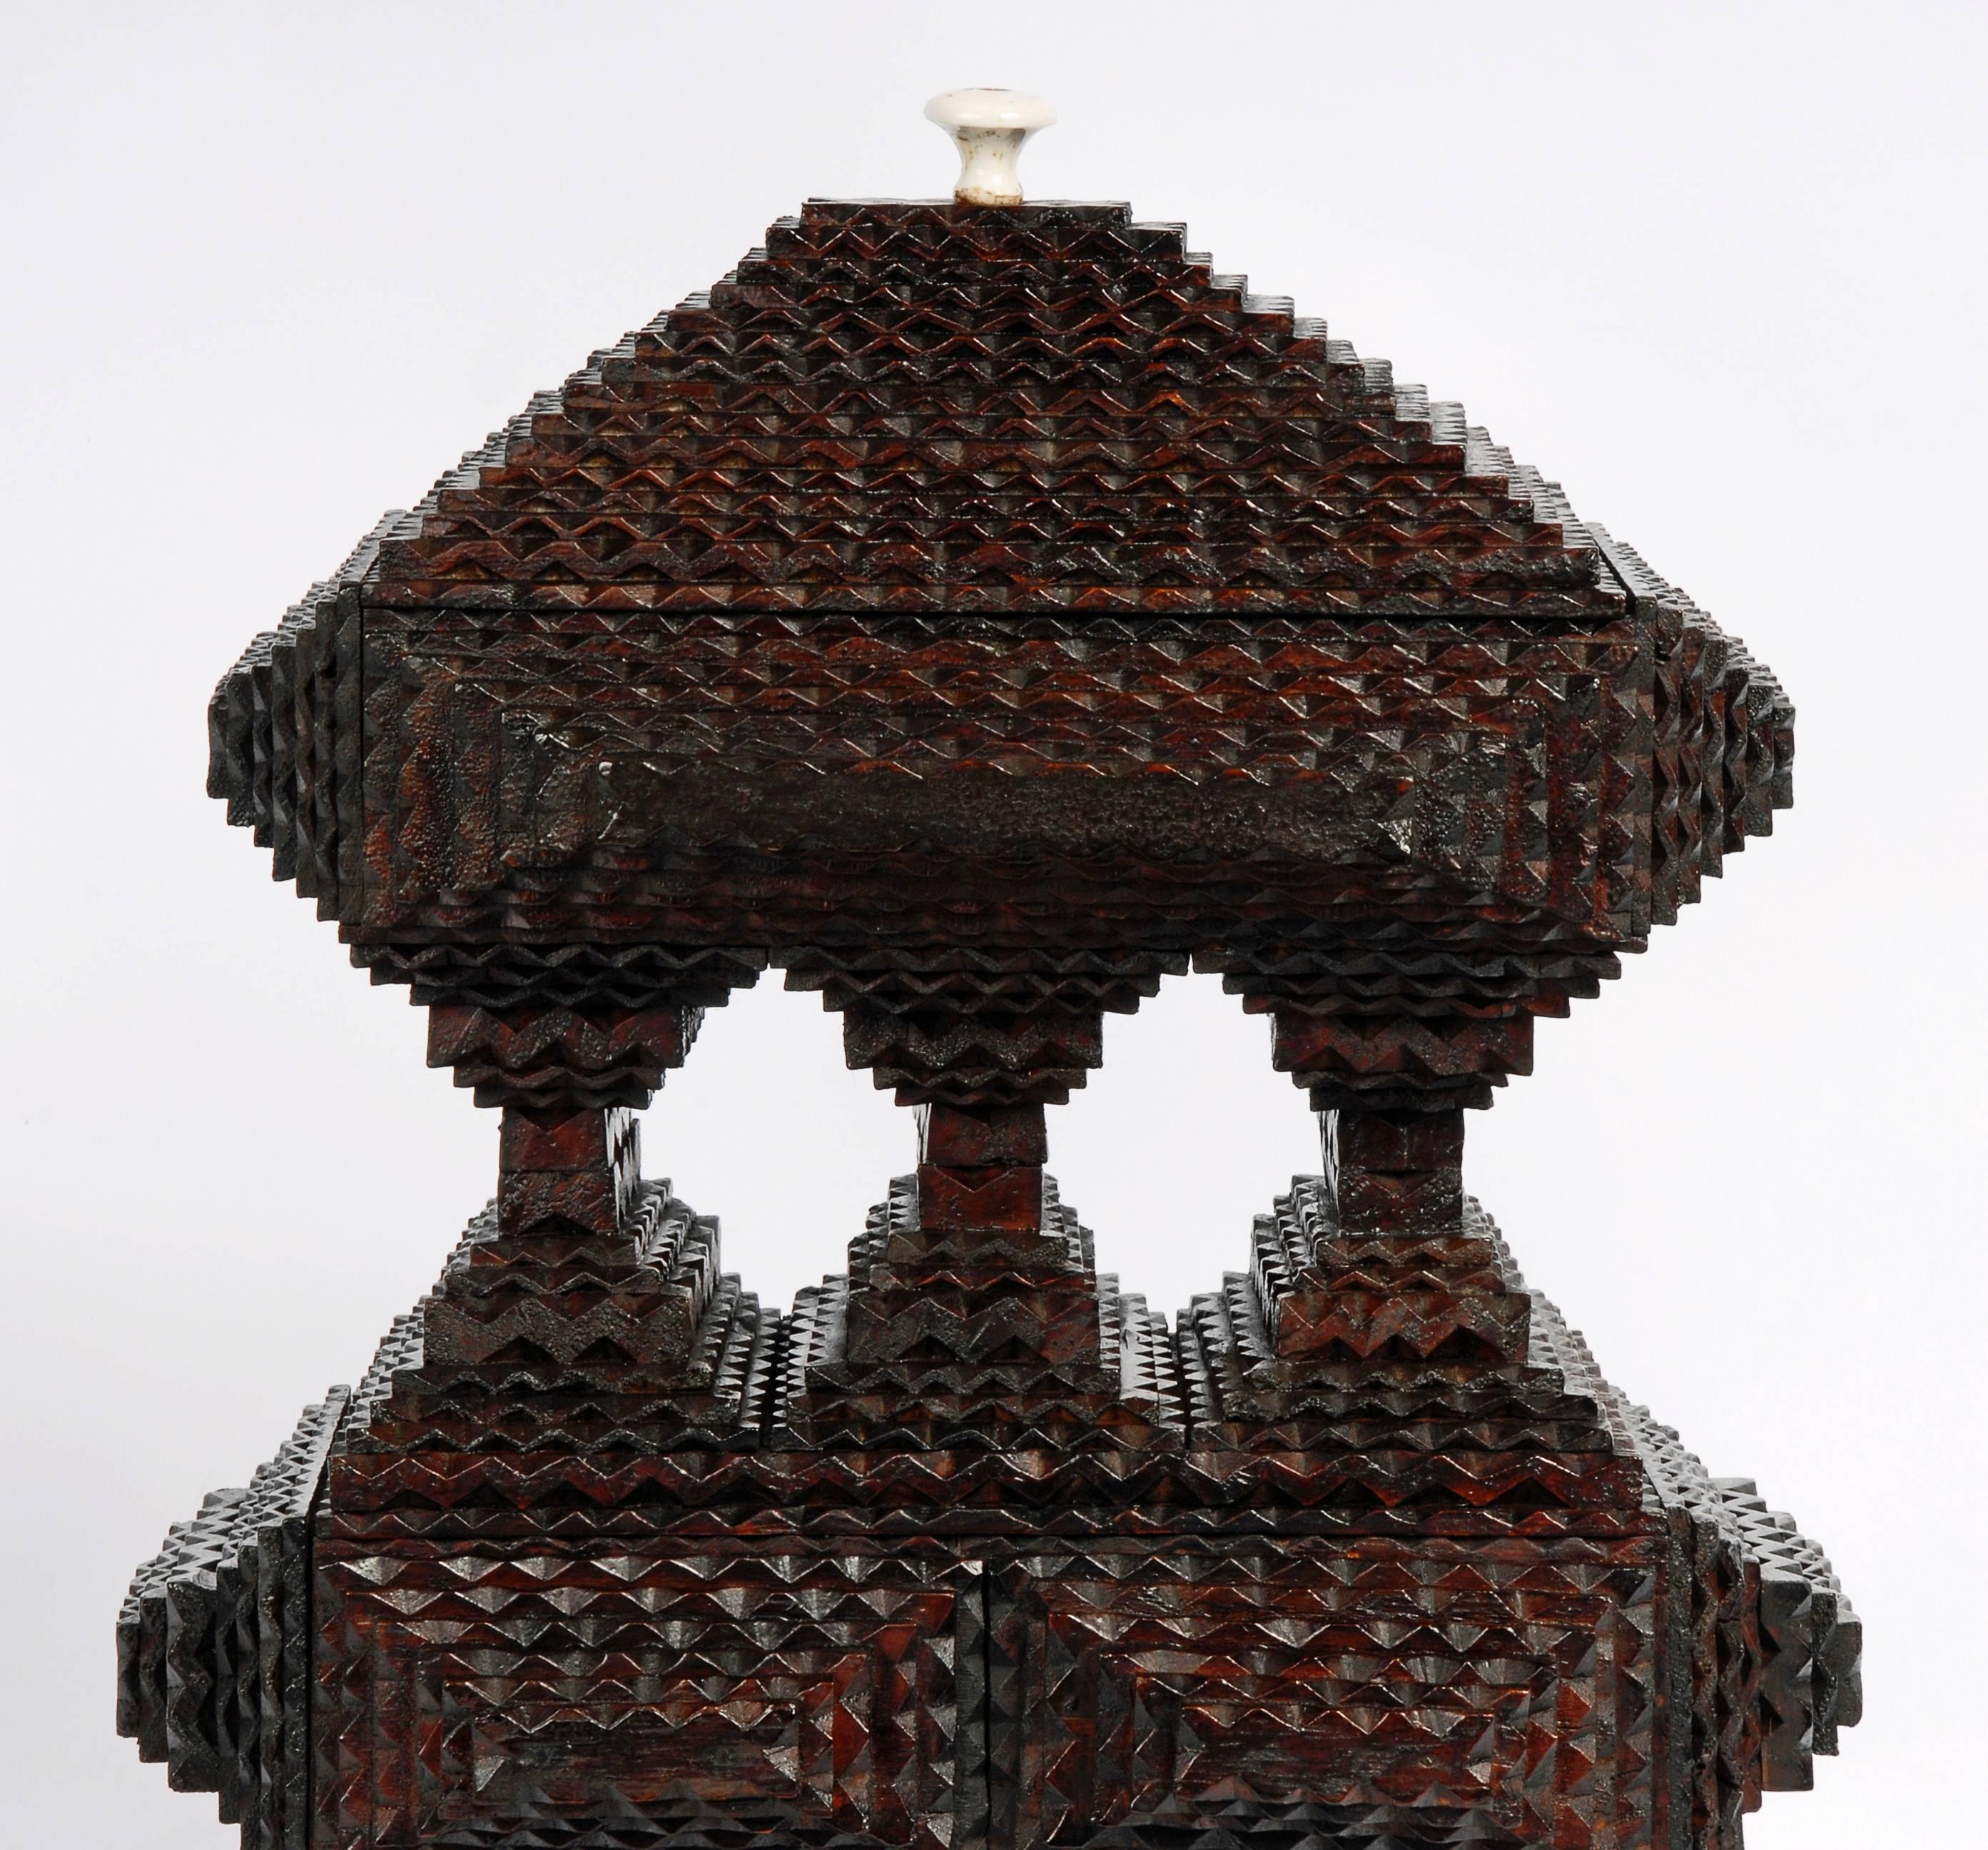 A fine deeply layered Tramp Art pyramidal box with a pedestal base and a three column pedestal middle. This impressive sculpture has a lift-top and a side drawer. 

Found in Scranton, PA,
circa 1880s-1890.